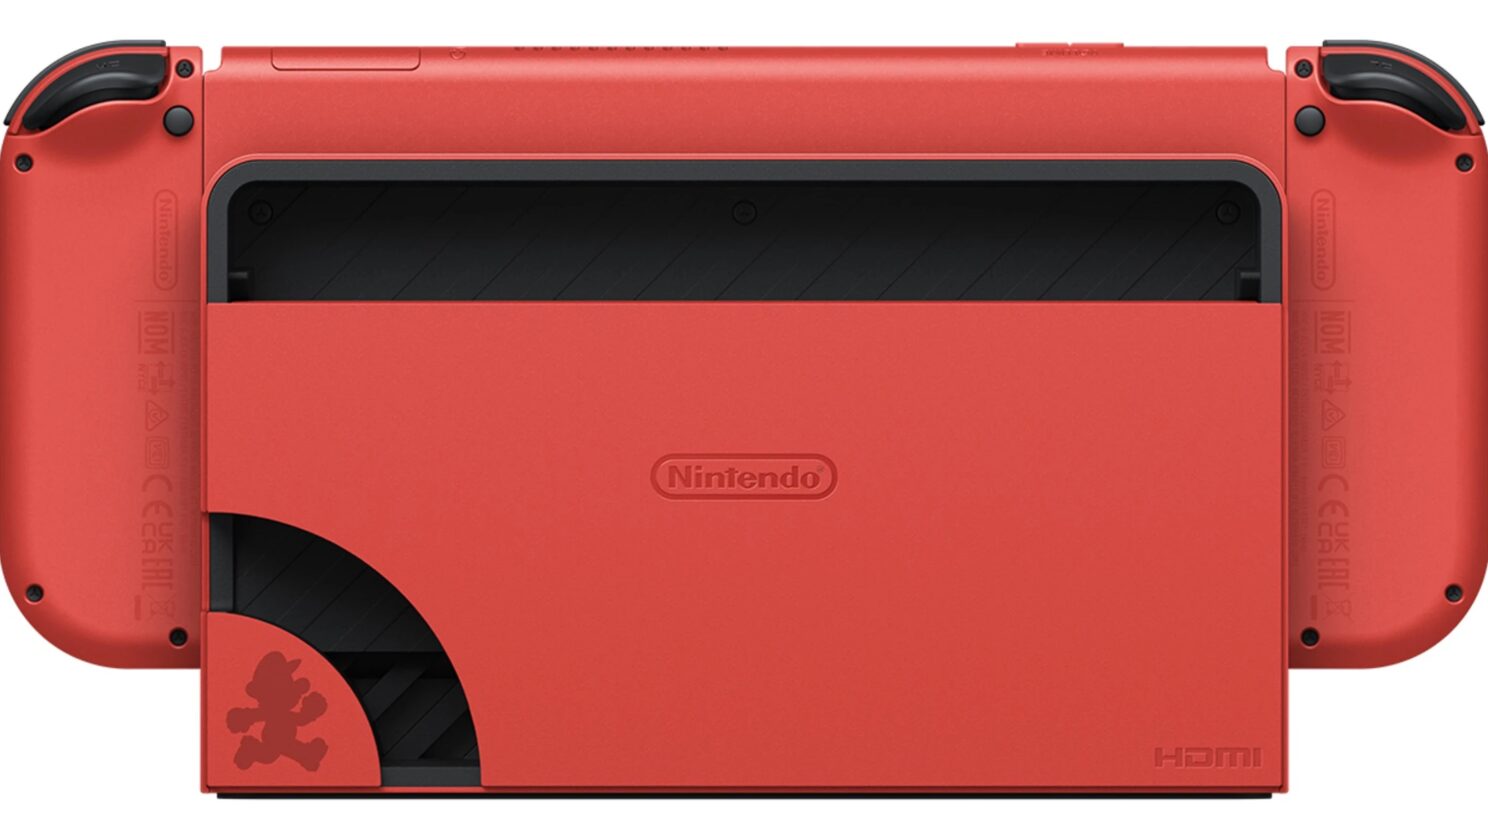 112872-nintendo-switch-oled-model-mario-red-edition-dock-console-back-1200×675